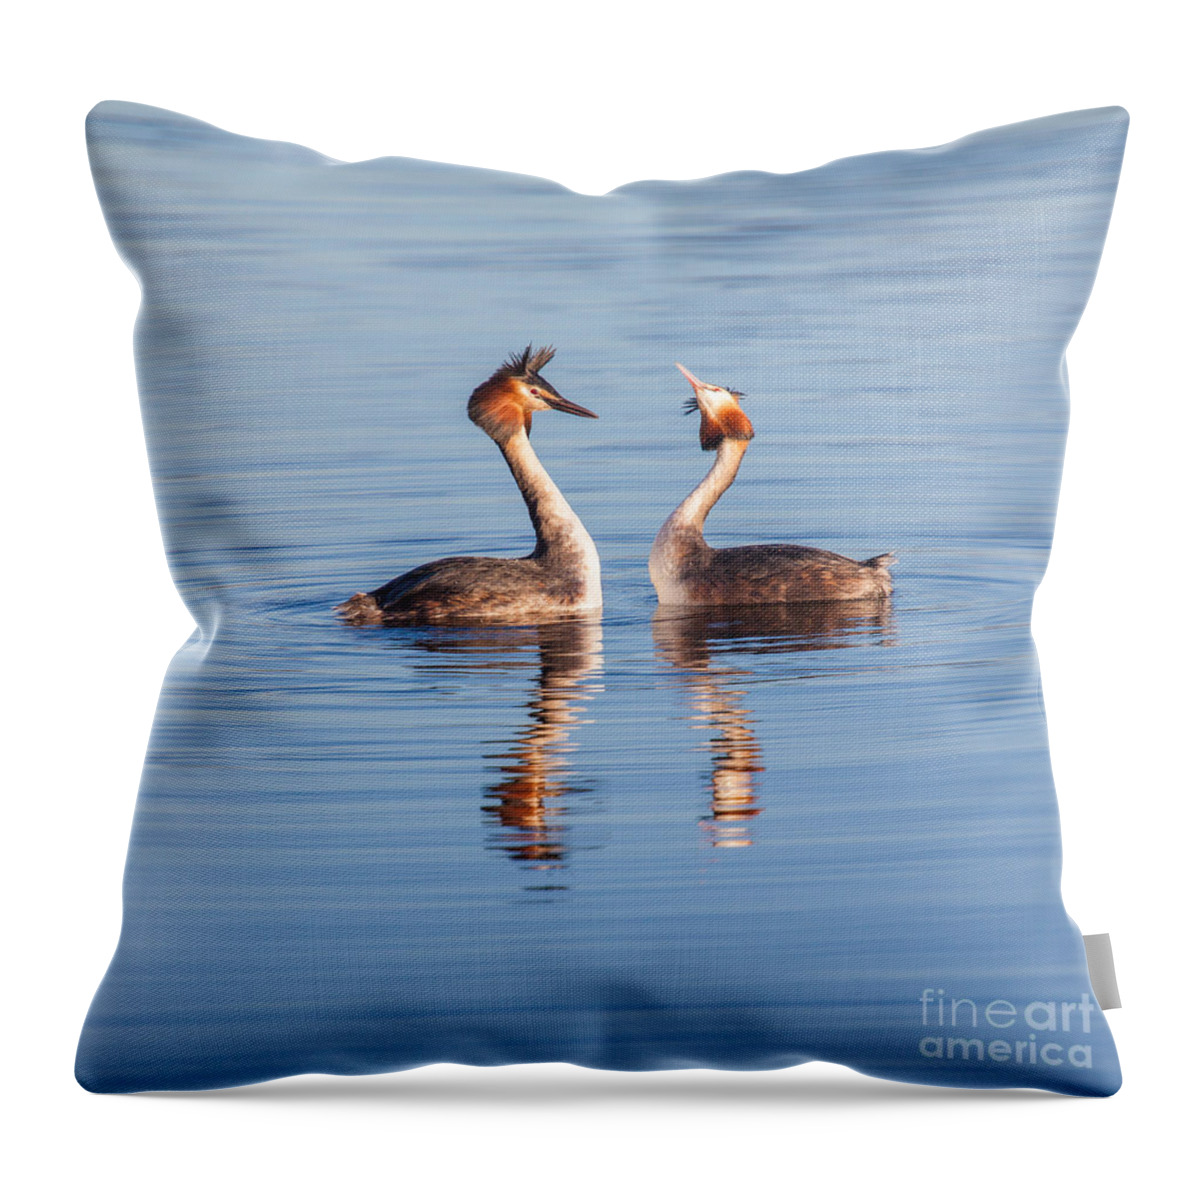 Fuut Throw Pillow featuring the photograph You're kidding by Casper Cammeraat